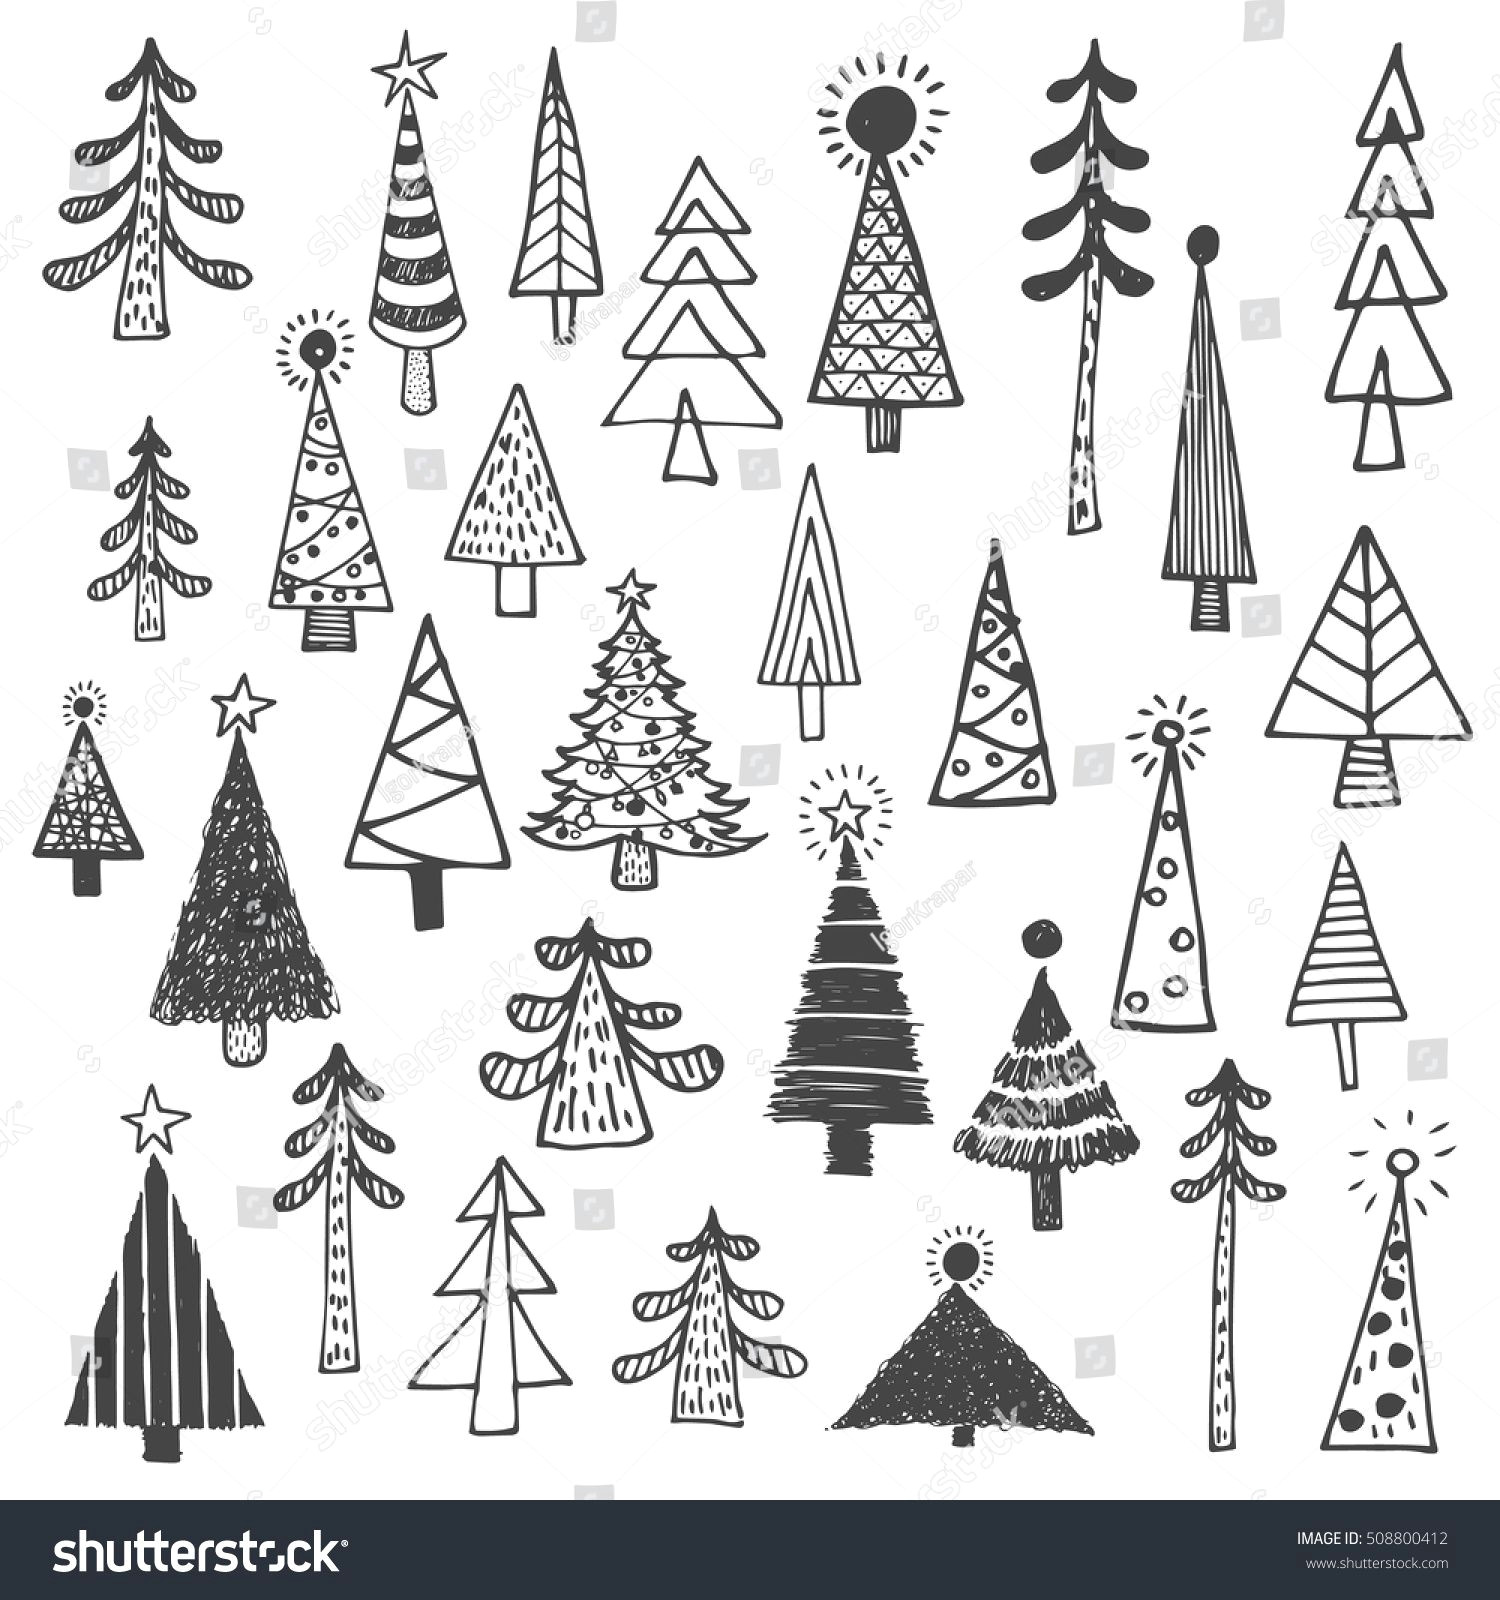 Easy Christmas Patterns to Draw Christmas Tree White Spruce Fir Fir Tree Simple Drawing Set